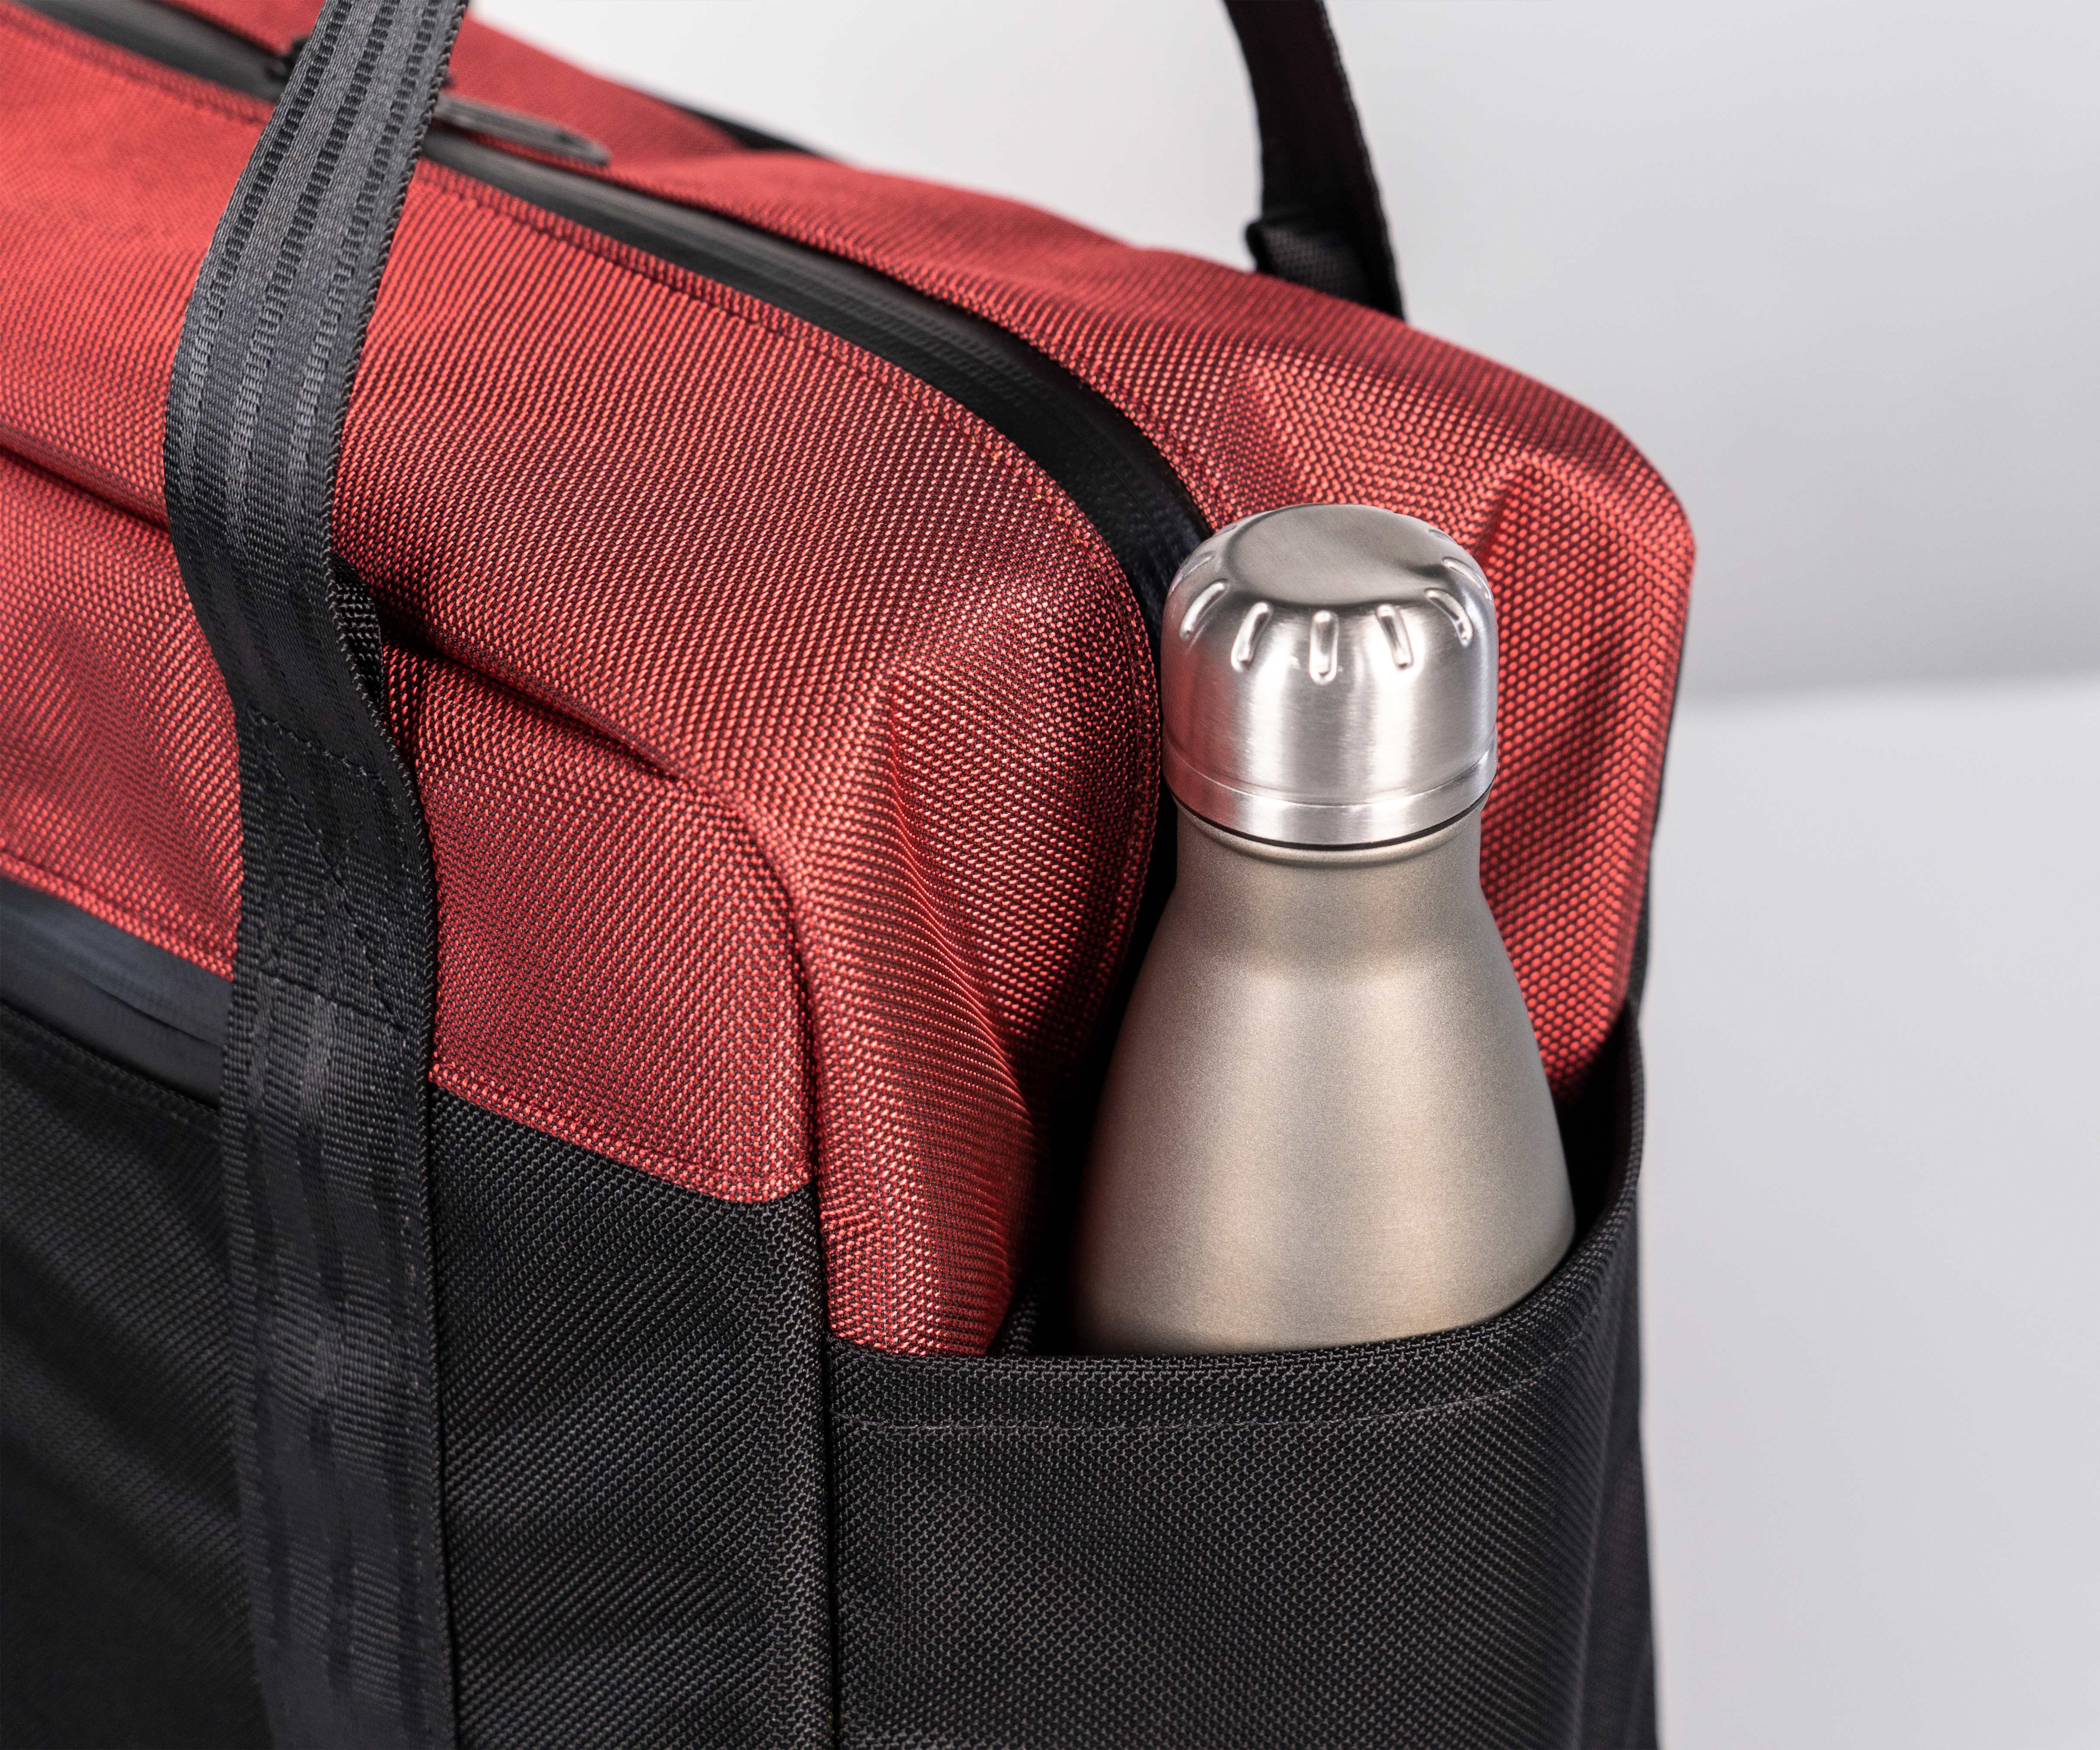 Side pockets for water bottles or catch-all